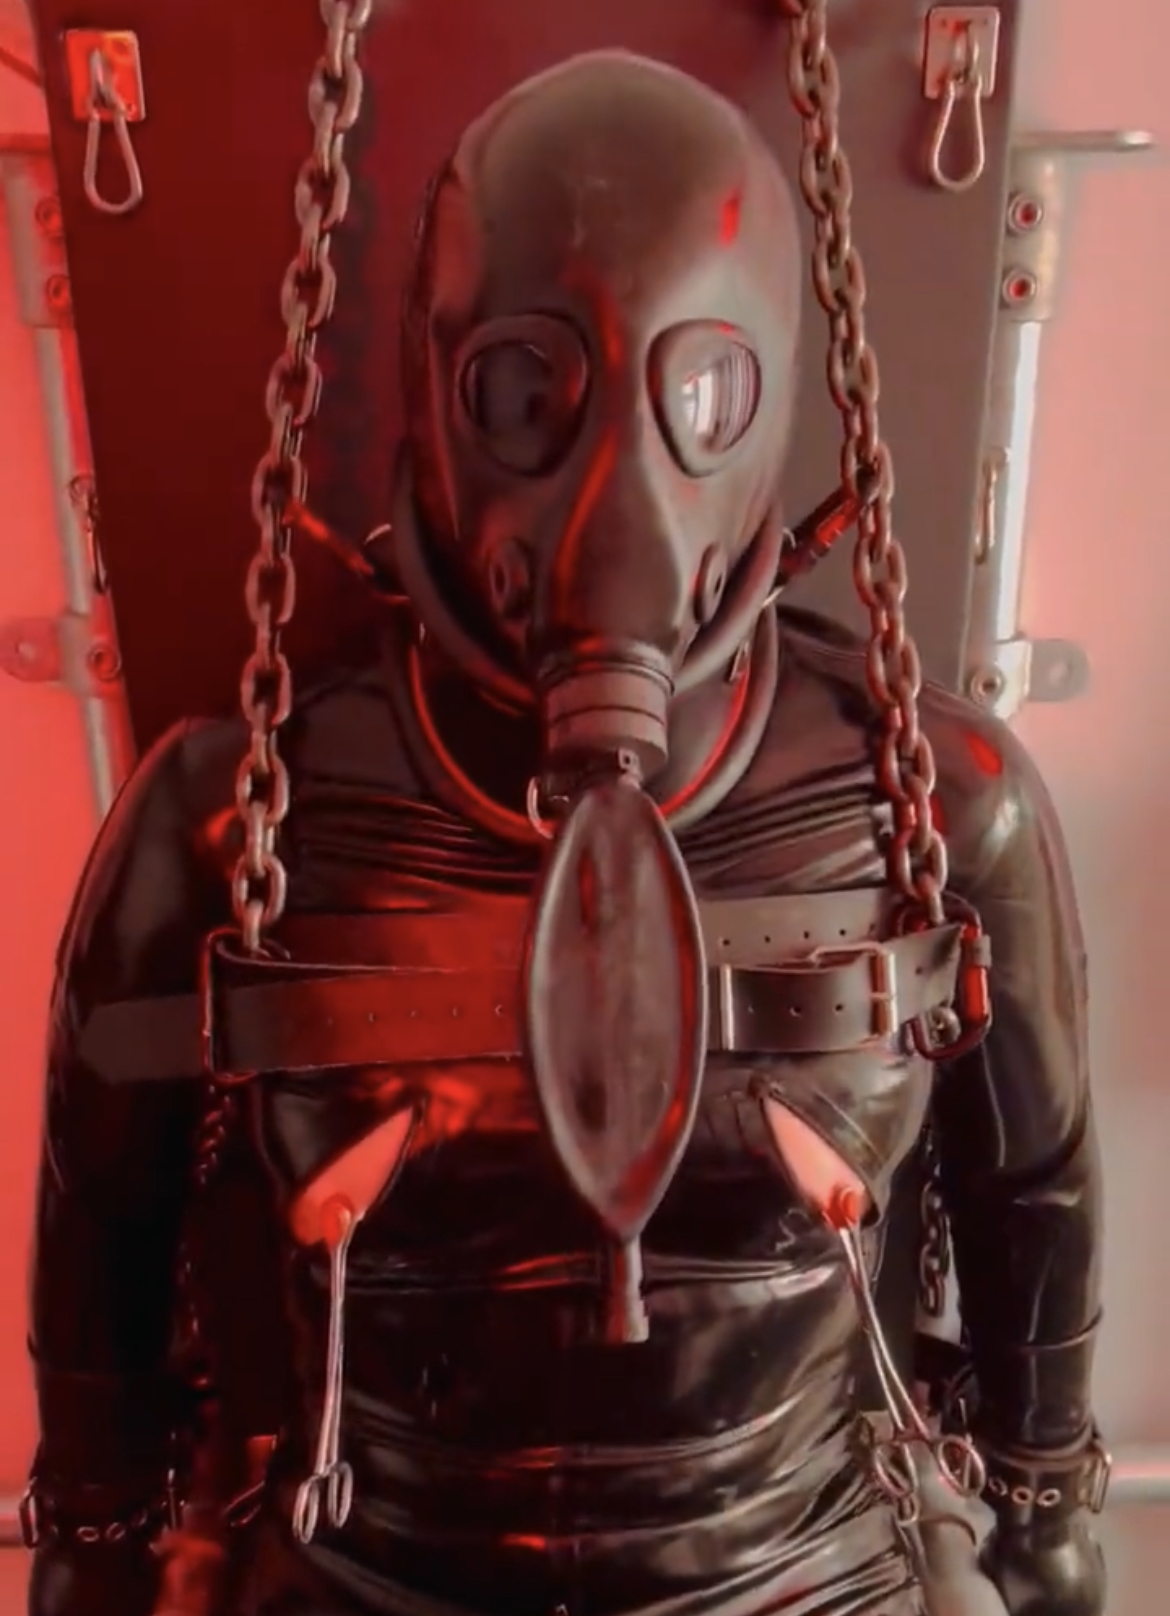 Two full rubber gimps with breath control